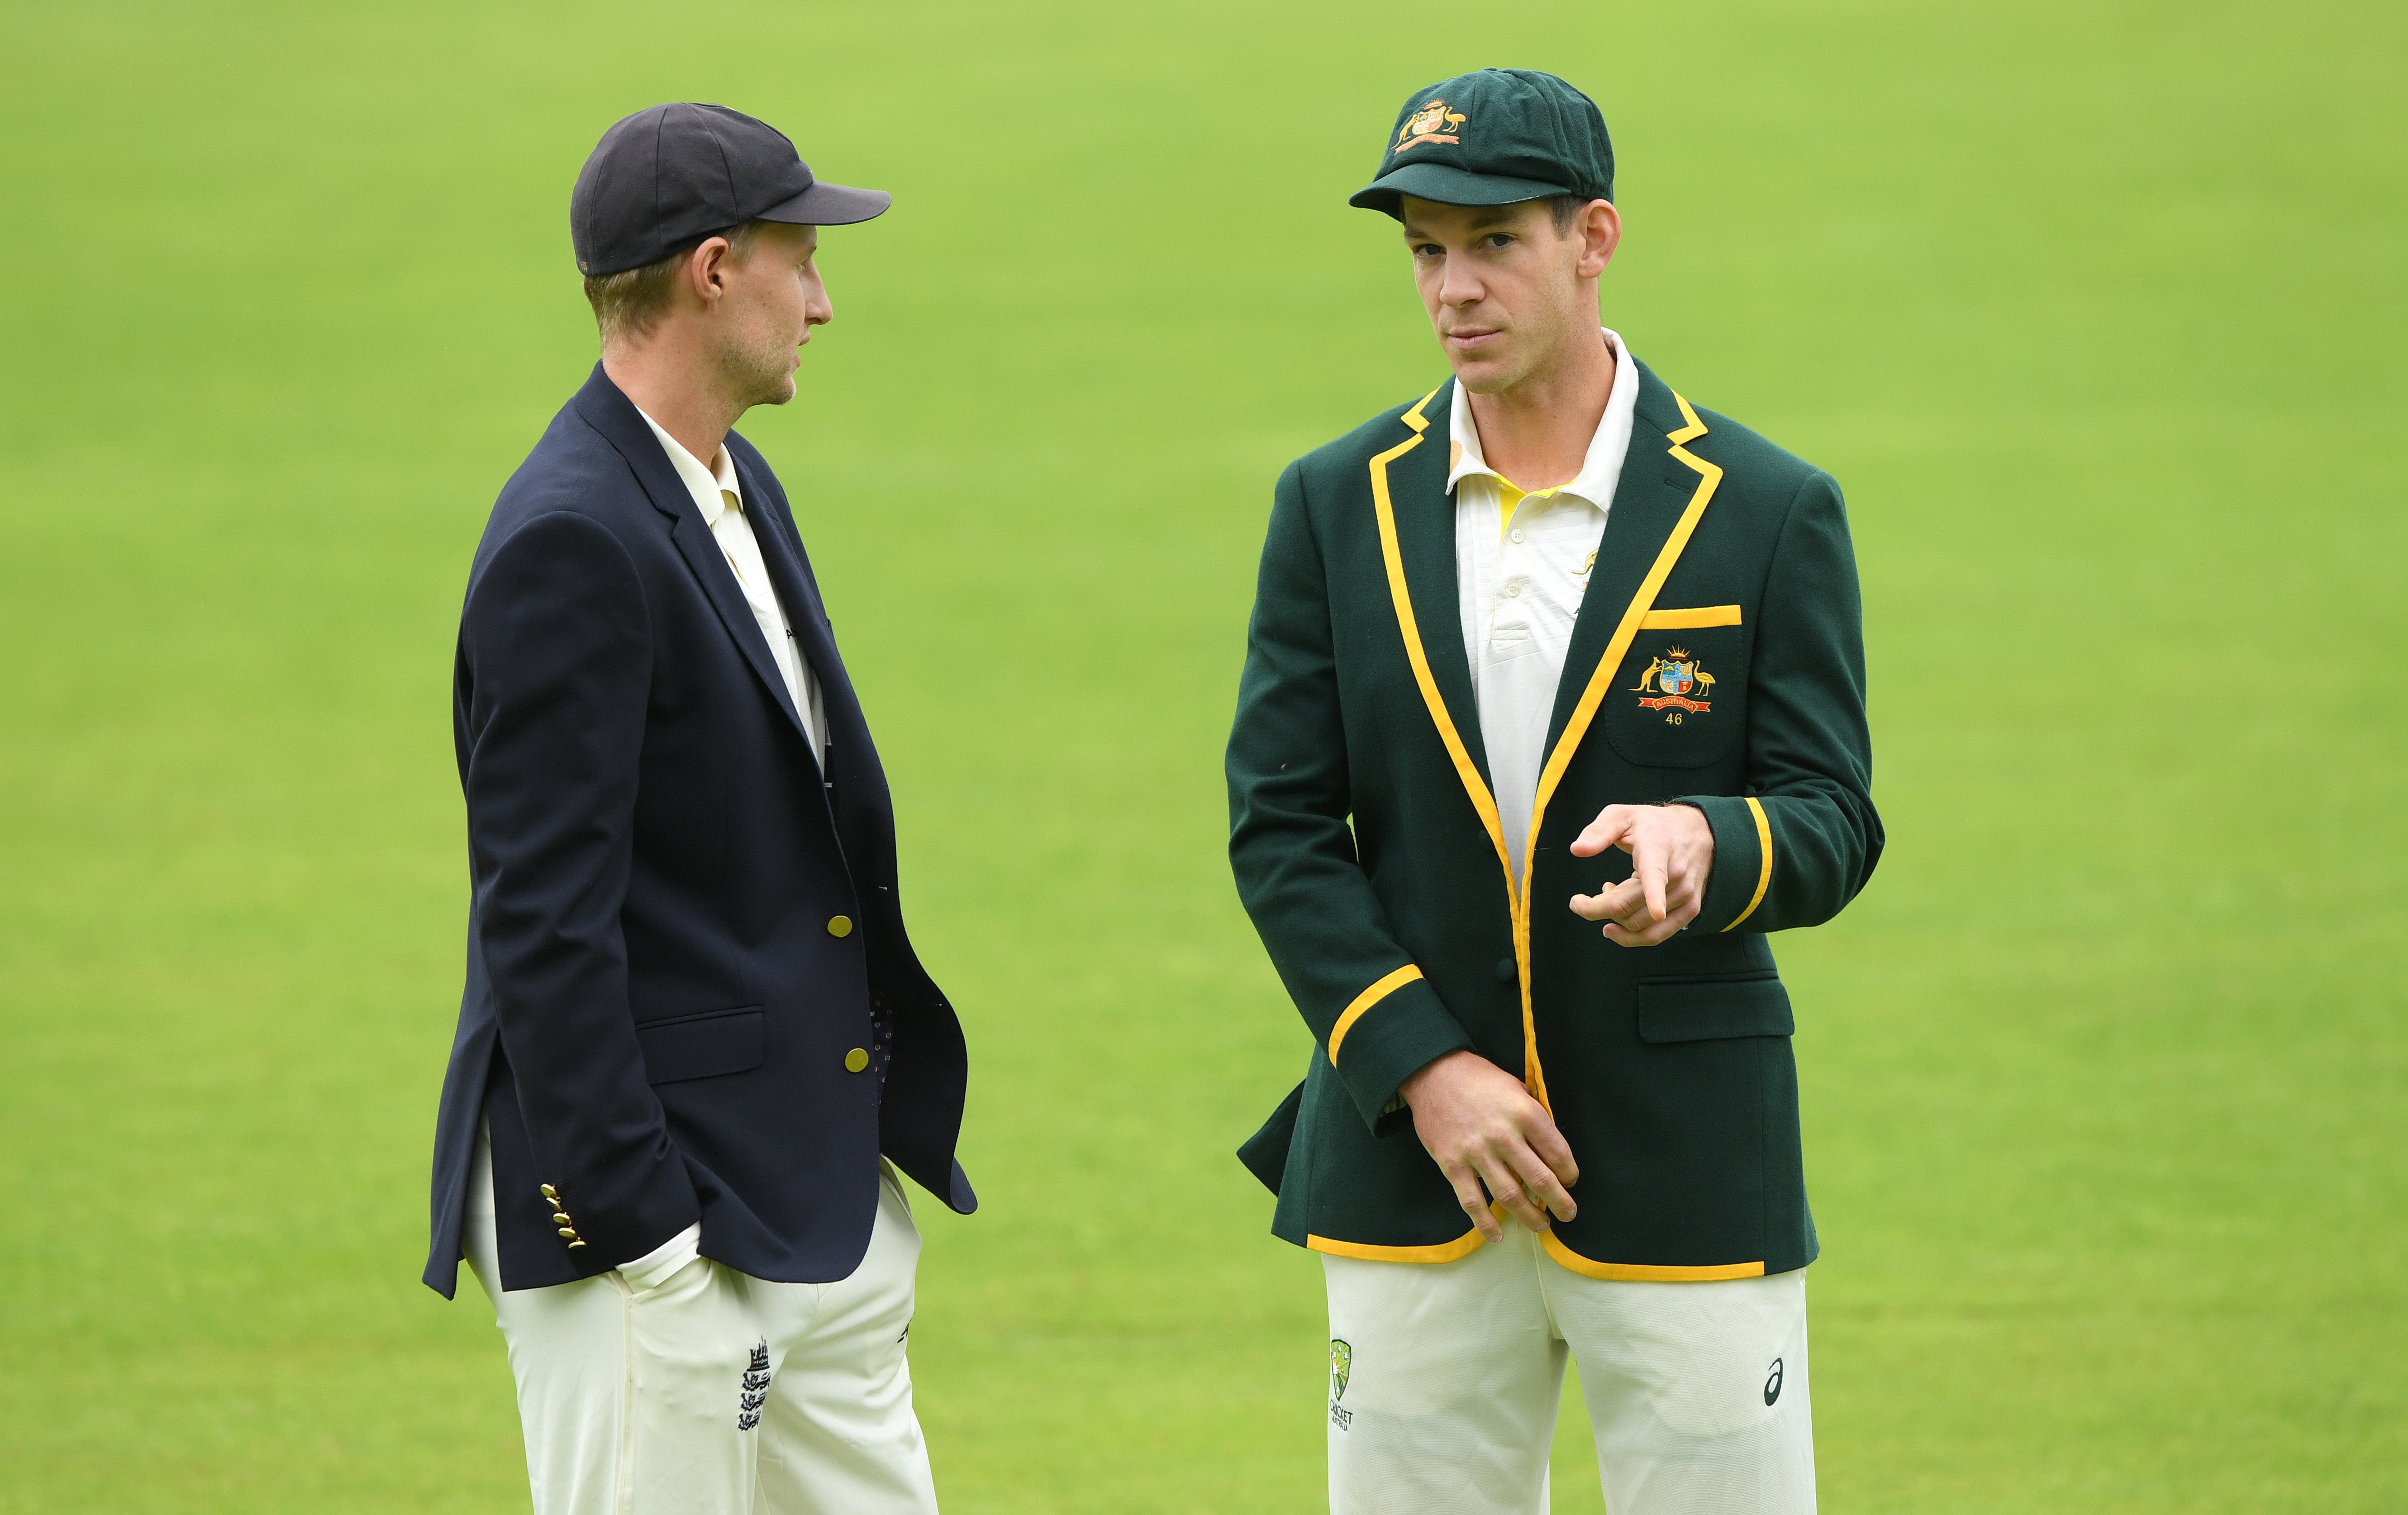 The Ashes series featuring England’s Joe Root (left) and Australia’s Tim Paine is in the balance